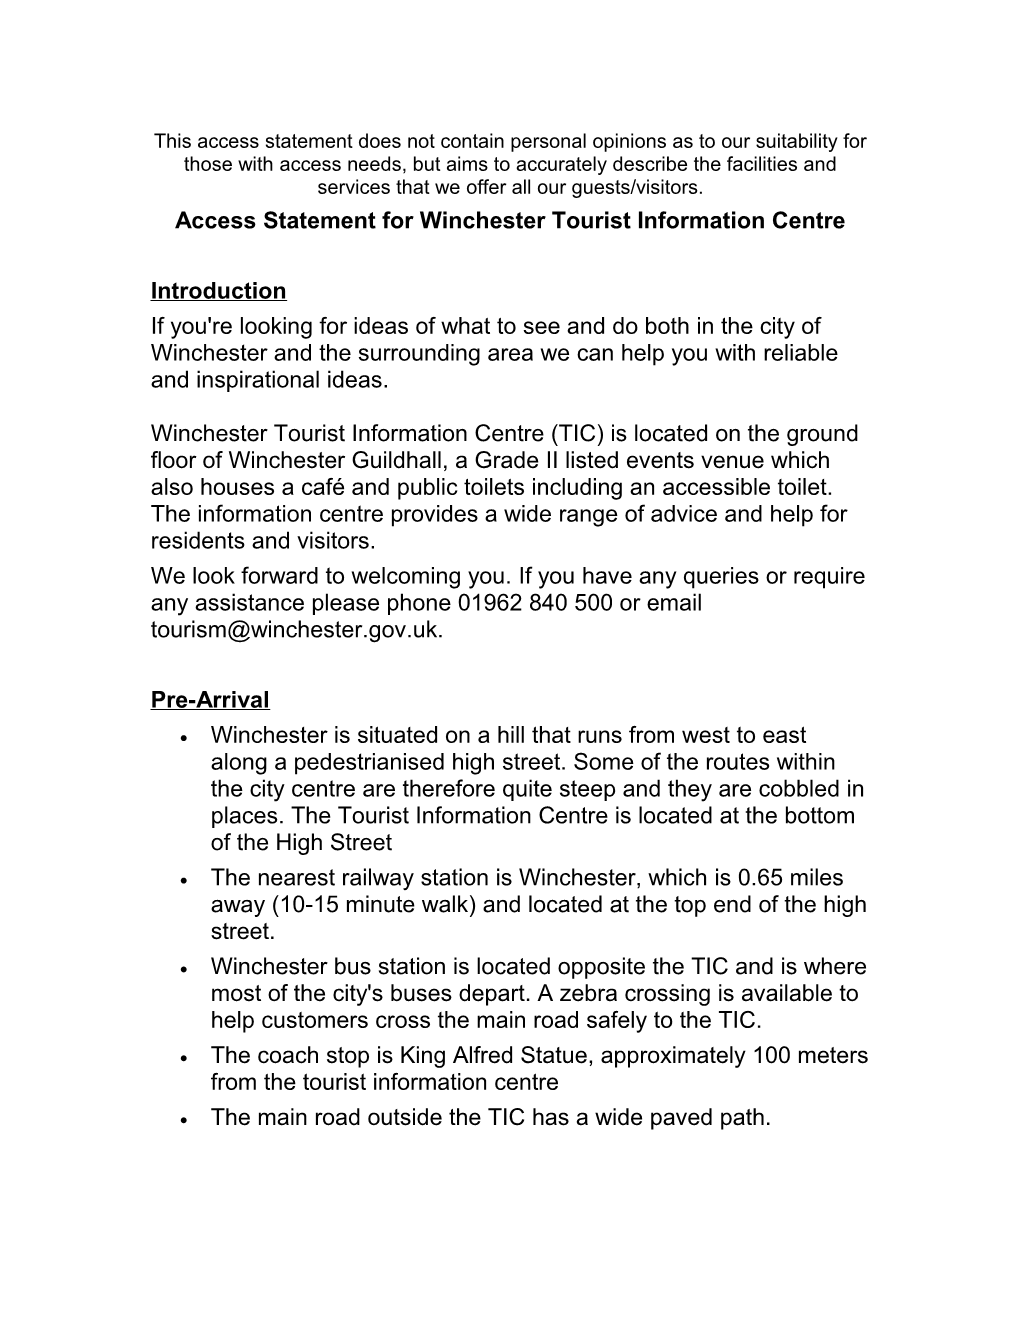 Access Statement for Winchester Tourist Information Centre